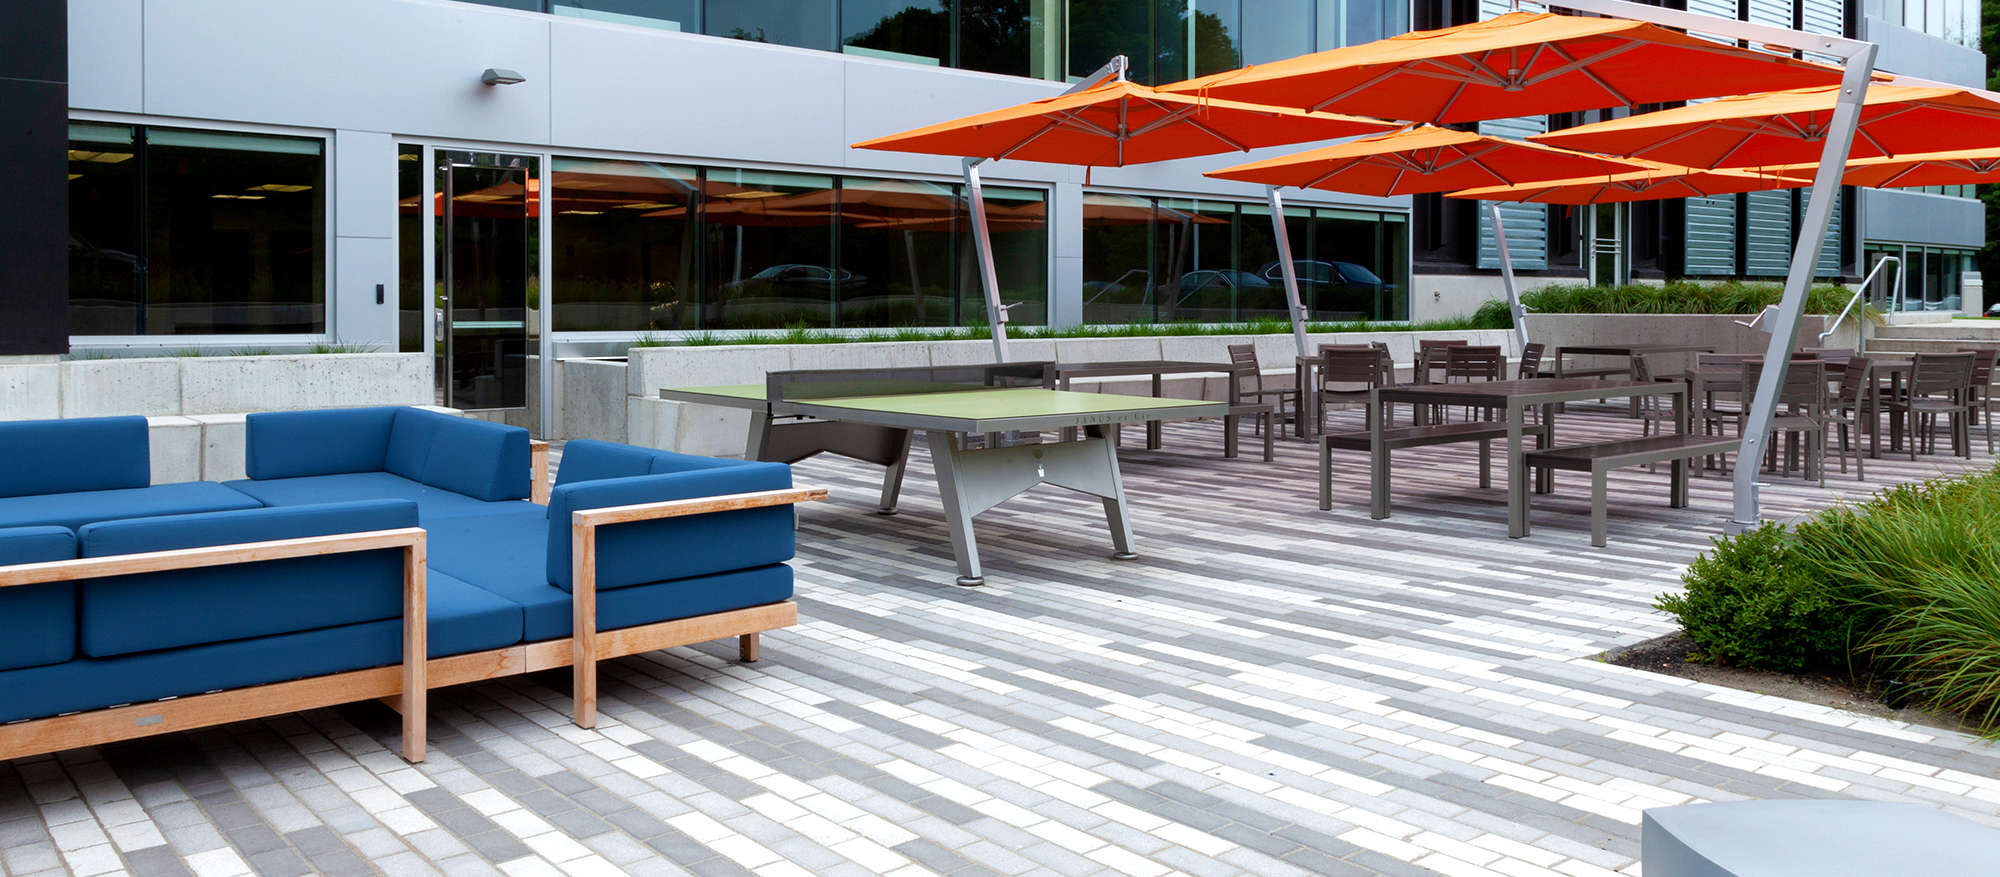 An outdoor amenity area features a 3 color linear pattern made from Unilock pavers, outdoor furniture, and large orange umbrellas.